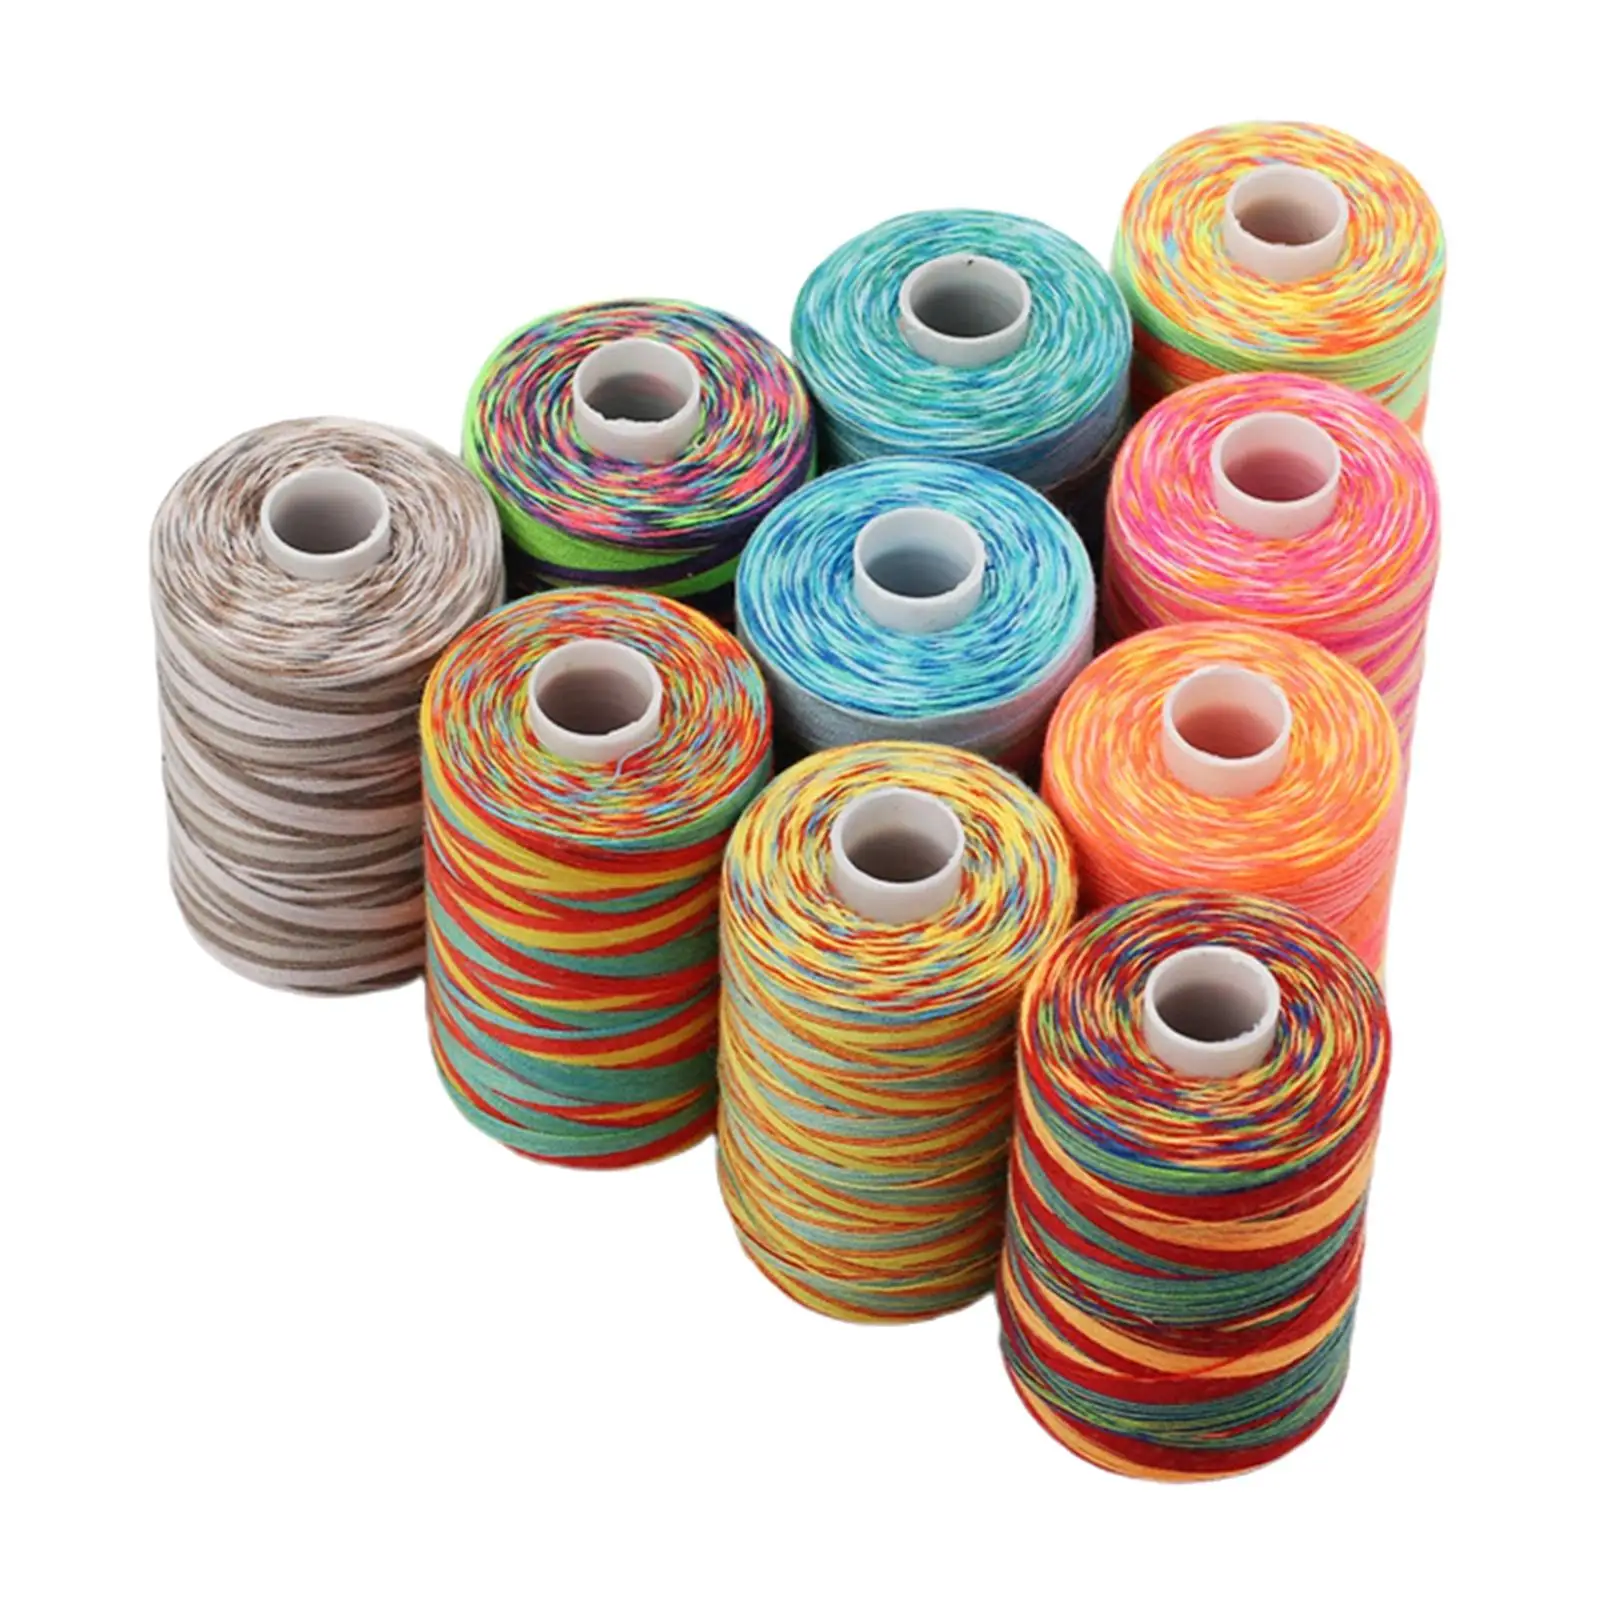 10Pcs High Tenacity Sewing Thread, Spool Sewing Thread Thread Kit for Overlock, Patchwork, Quilting, Crocheting, DIY Sewing